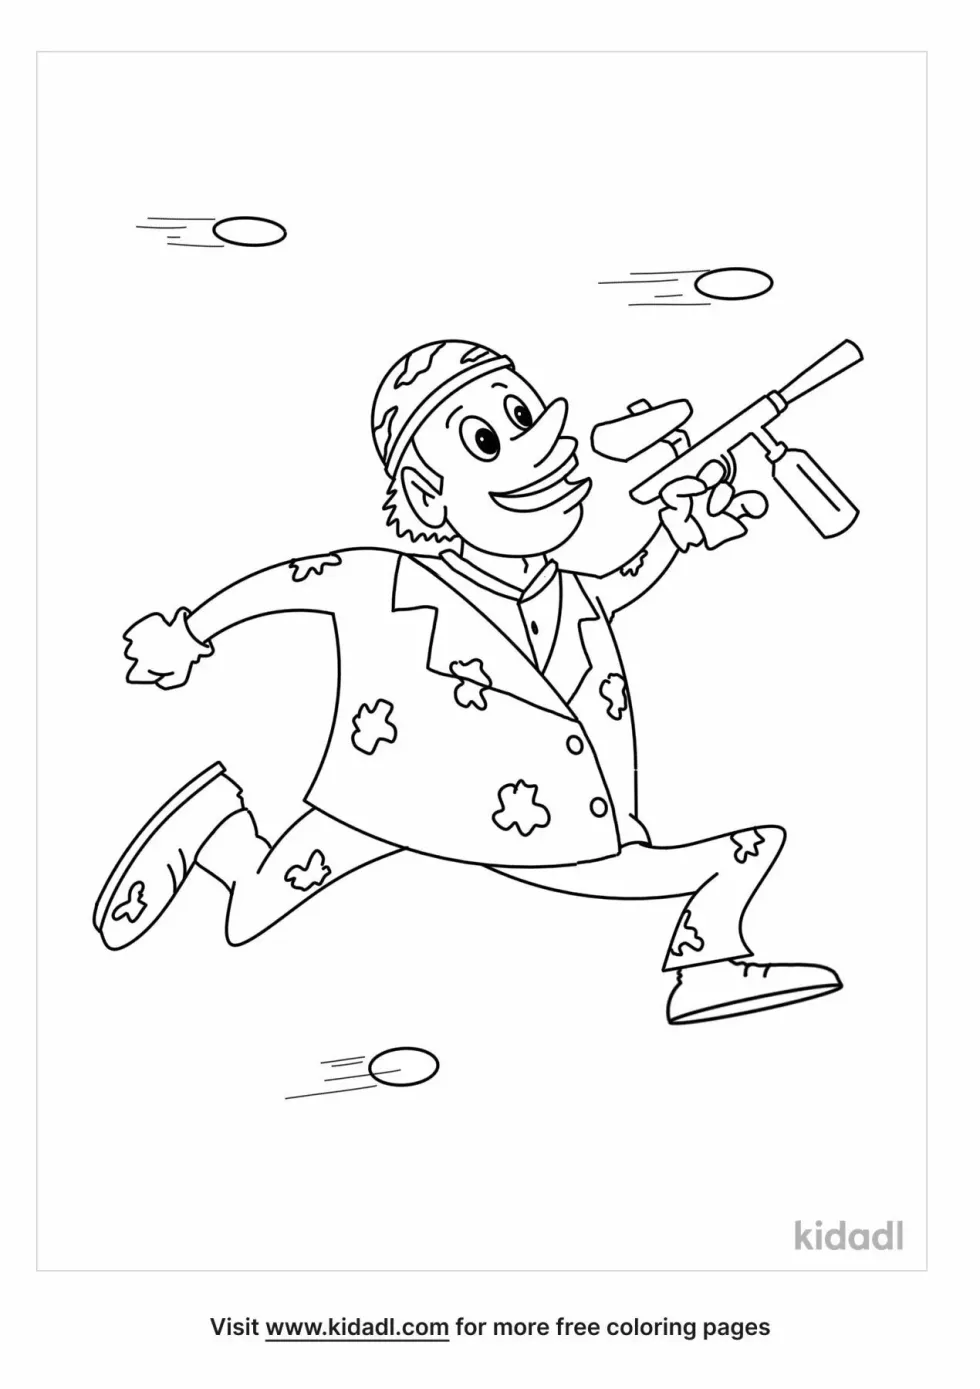 Paint Ball Fight Coloring Page